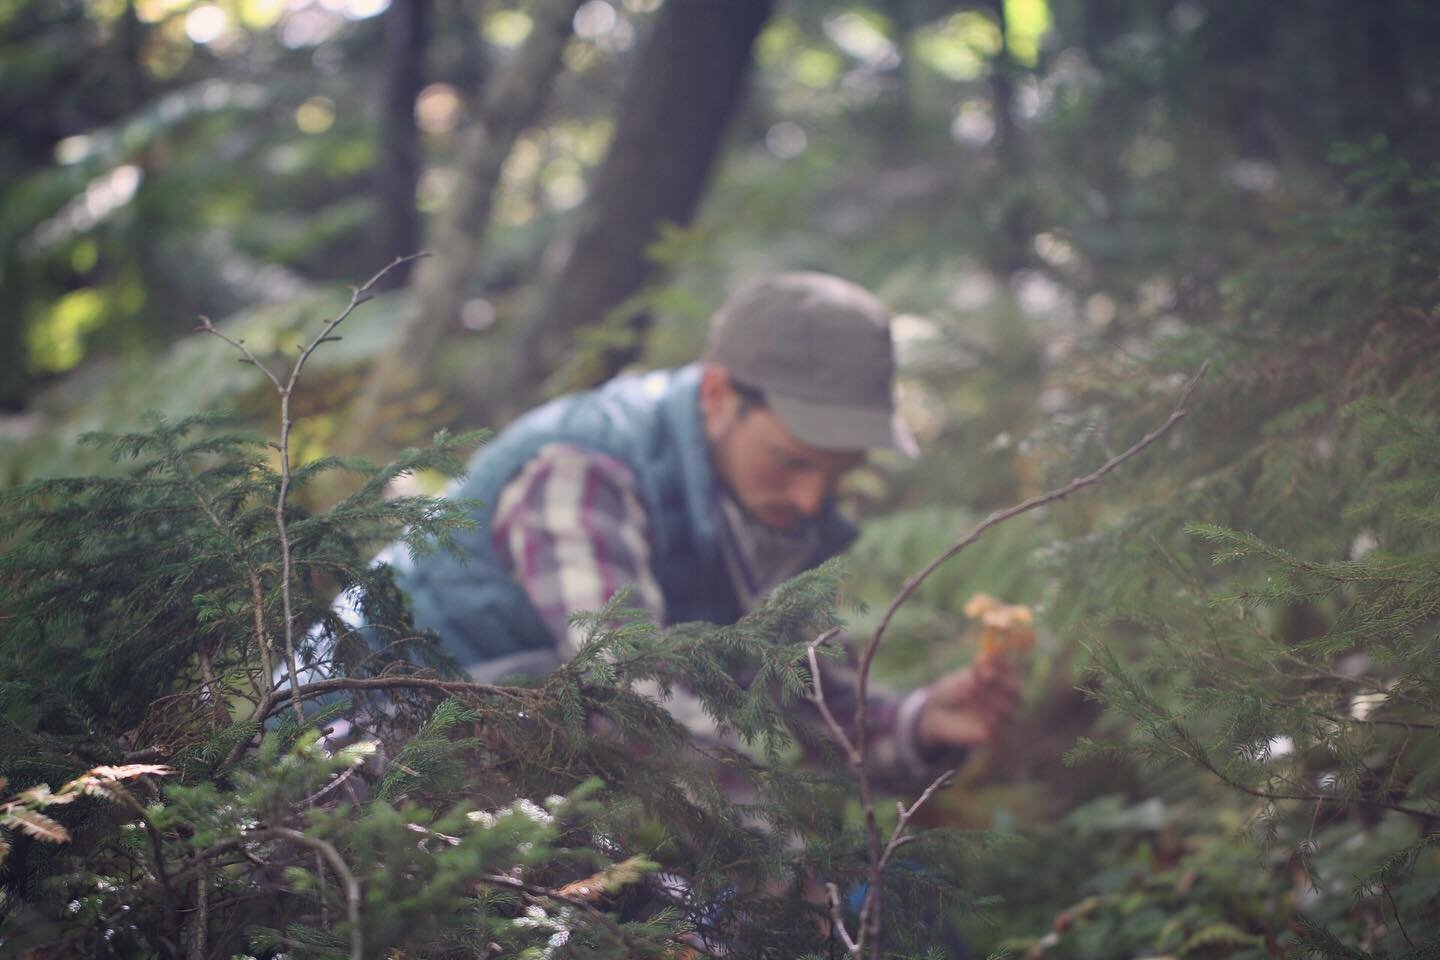 Do you love wild mushrooms? We invite you to participate in our new 2022 season Mycophile Membership program! We&rsquo;re excited to launch this new program aligning with the Northeast peak mushroom hunting season. Discover how to safely and fruitful